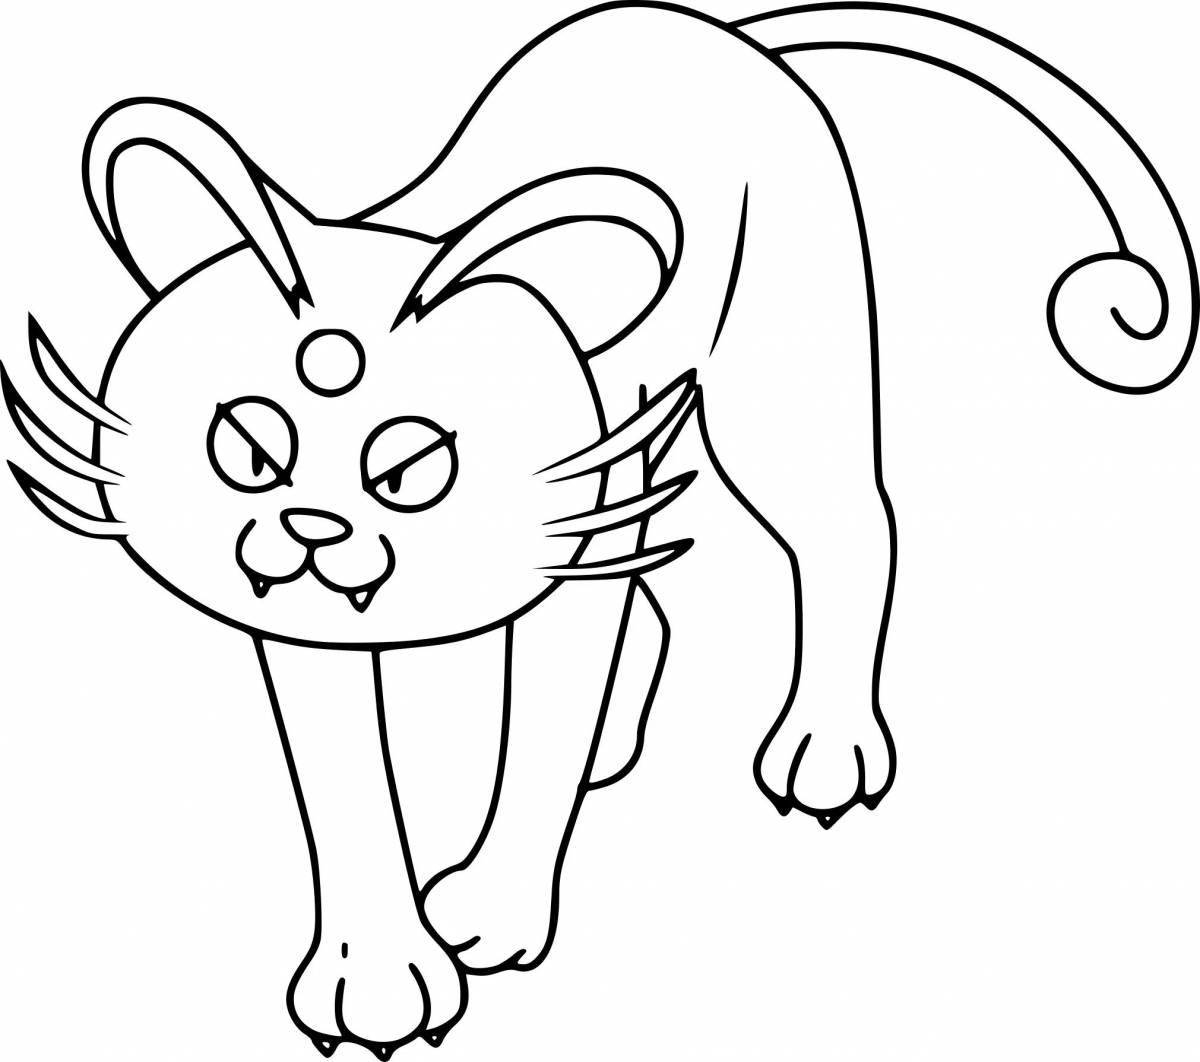 Adorable meowth coloring page